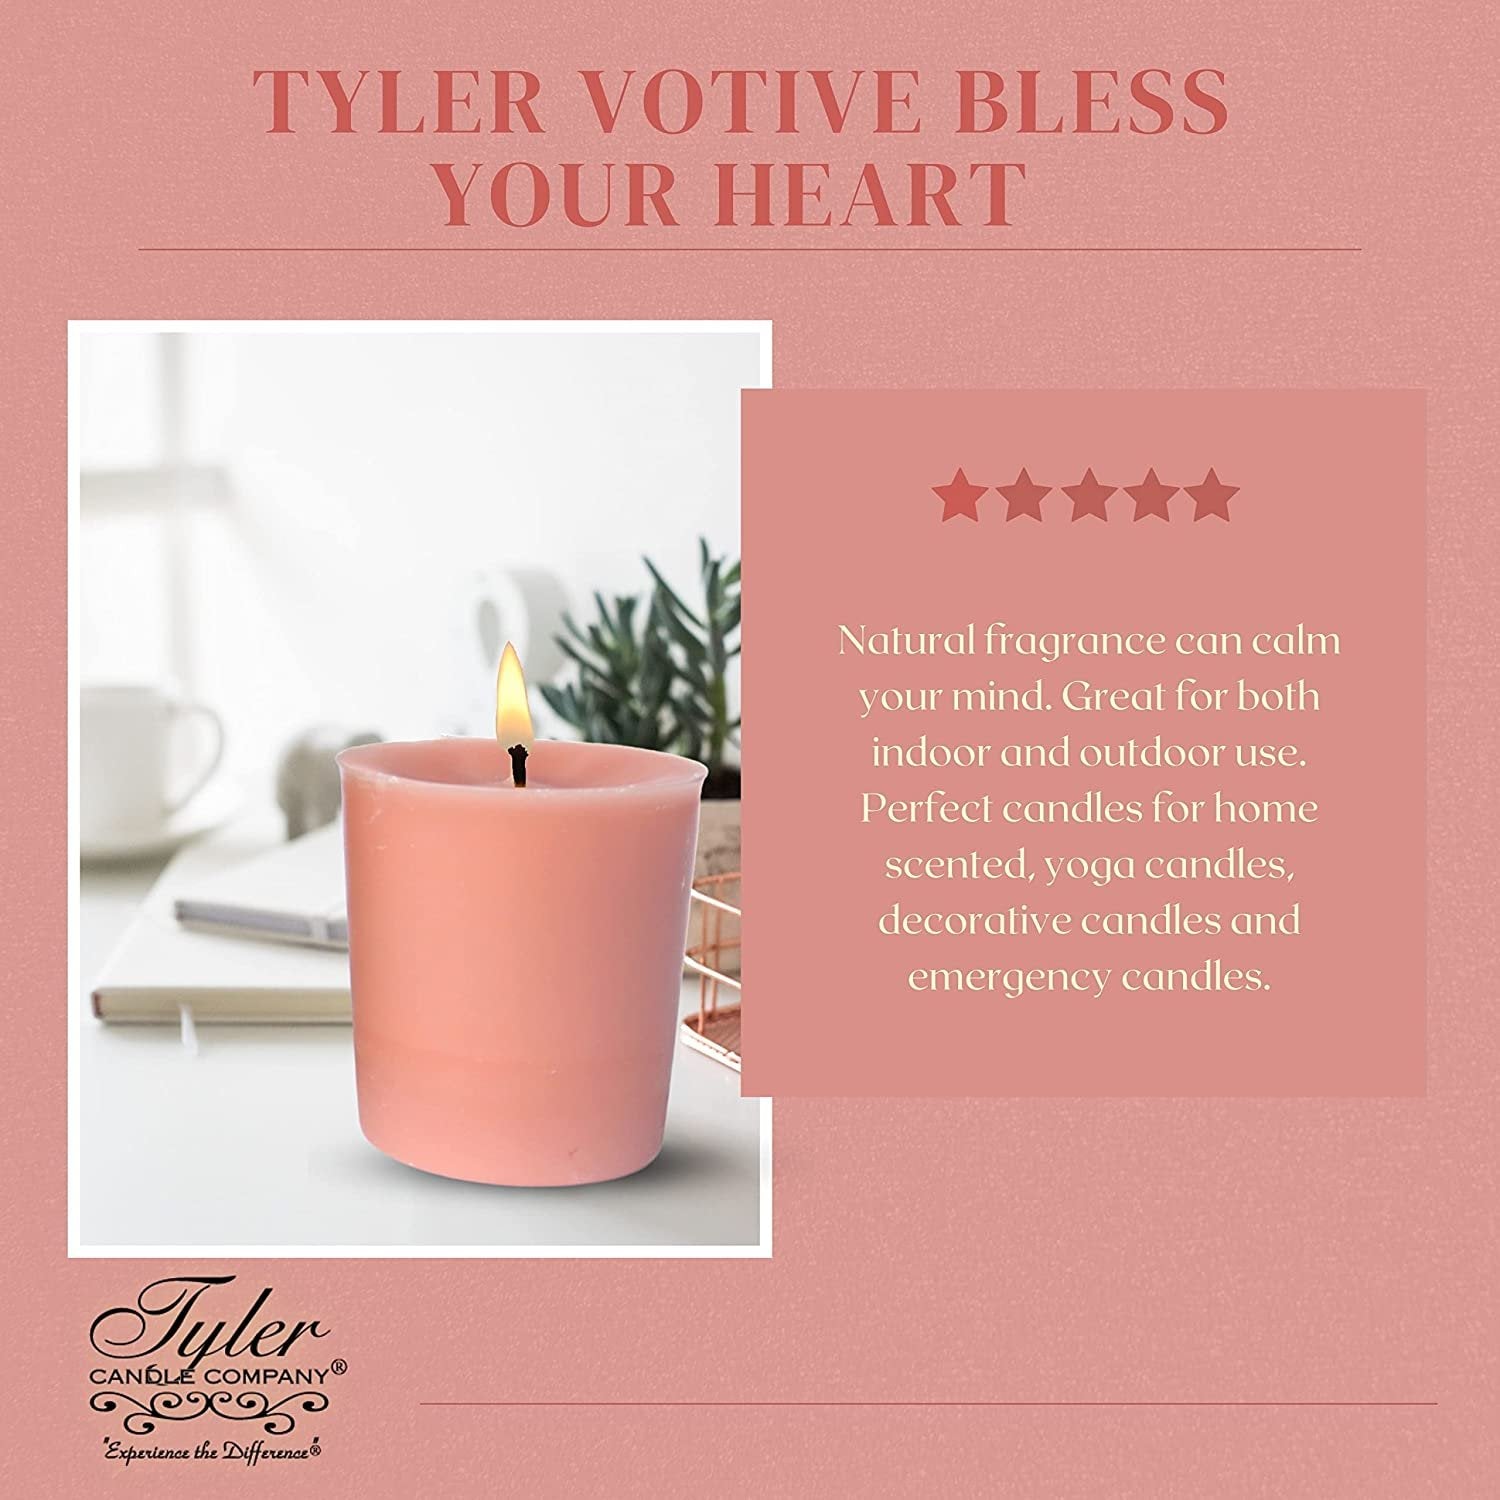 Tyler Candle Company Bless Your Heart Votive Candles - Luxury Scented Candle with Essential Oils - 4 Pack of 2 oz Small Candles with 15 Hour Burn Time Each - with Bonus Key Chain